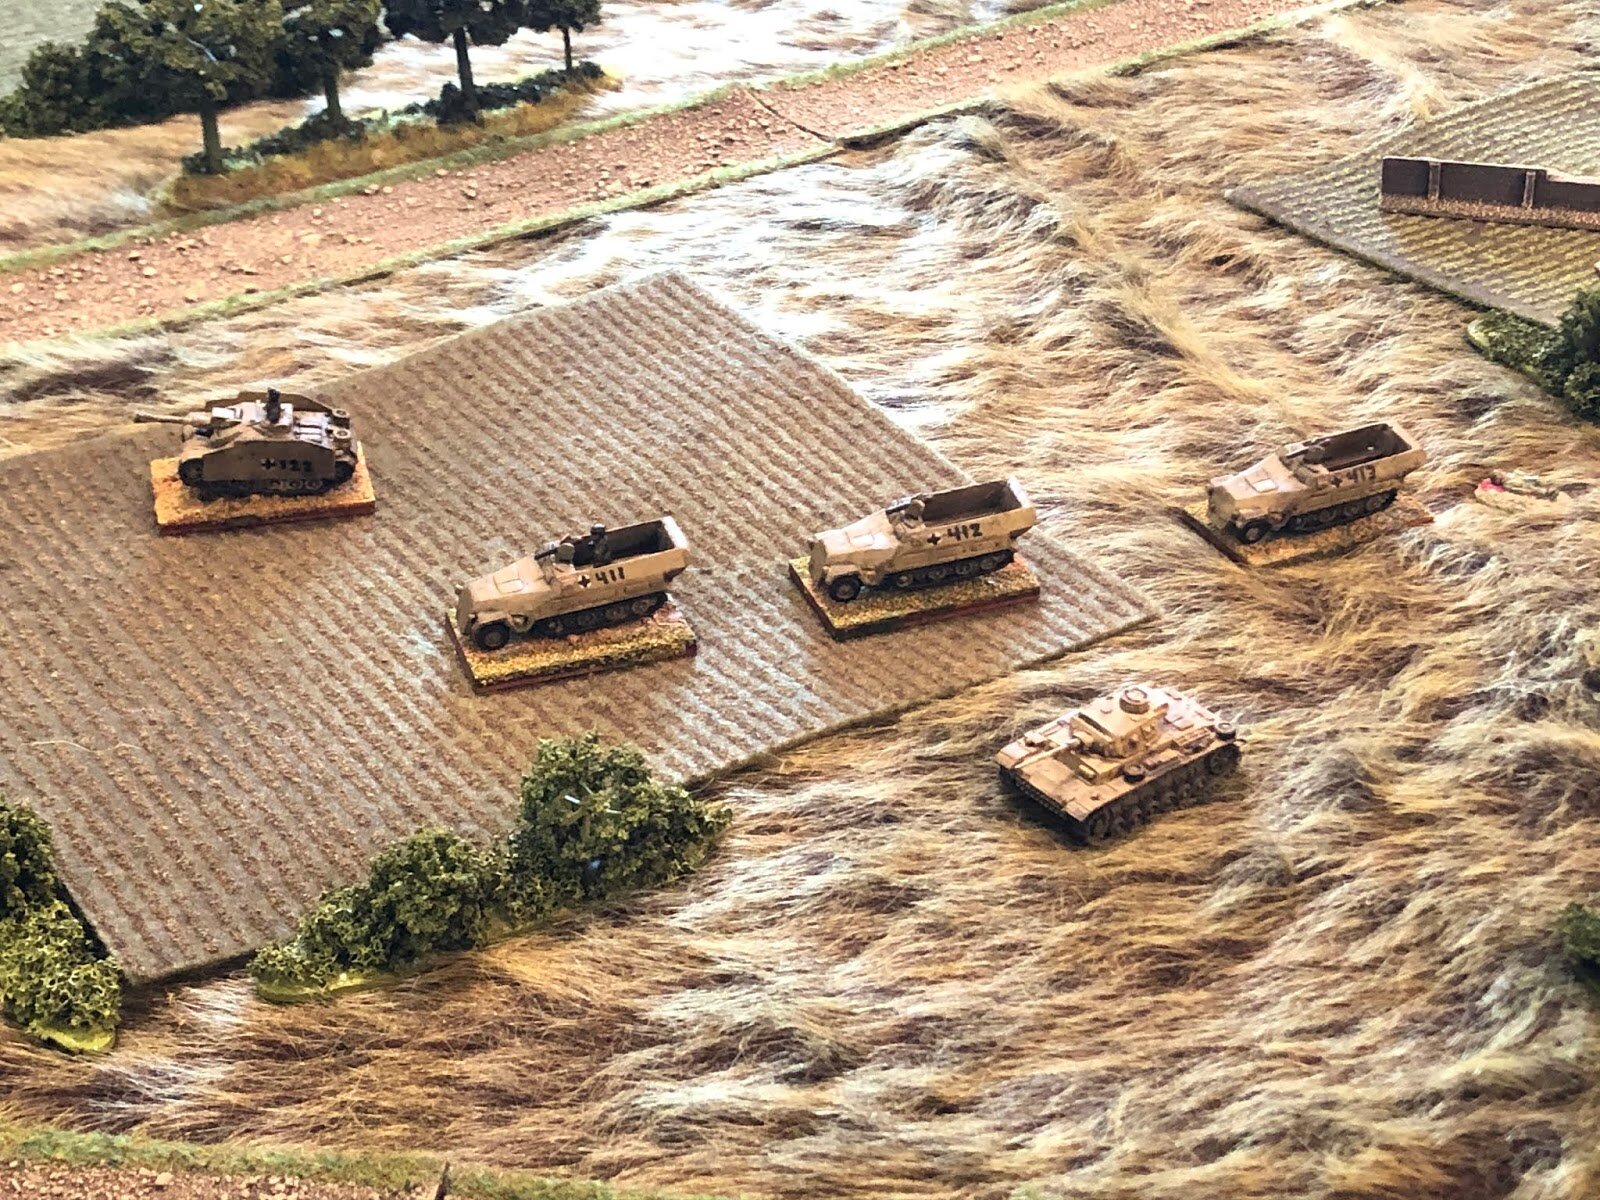 The German armor that had pushed further east realize the gig is up; they dismount, destroy their vehicles, and wait to be captured by the Soviets.